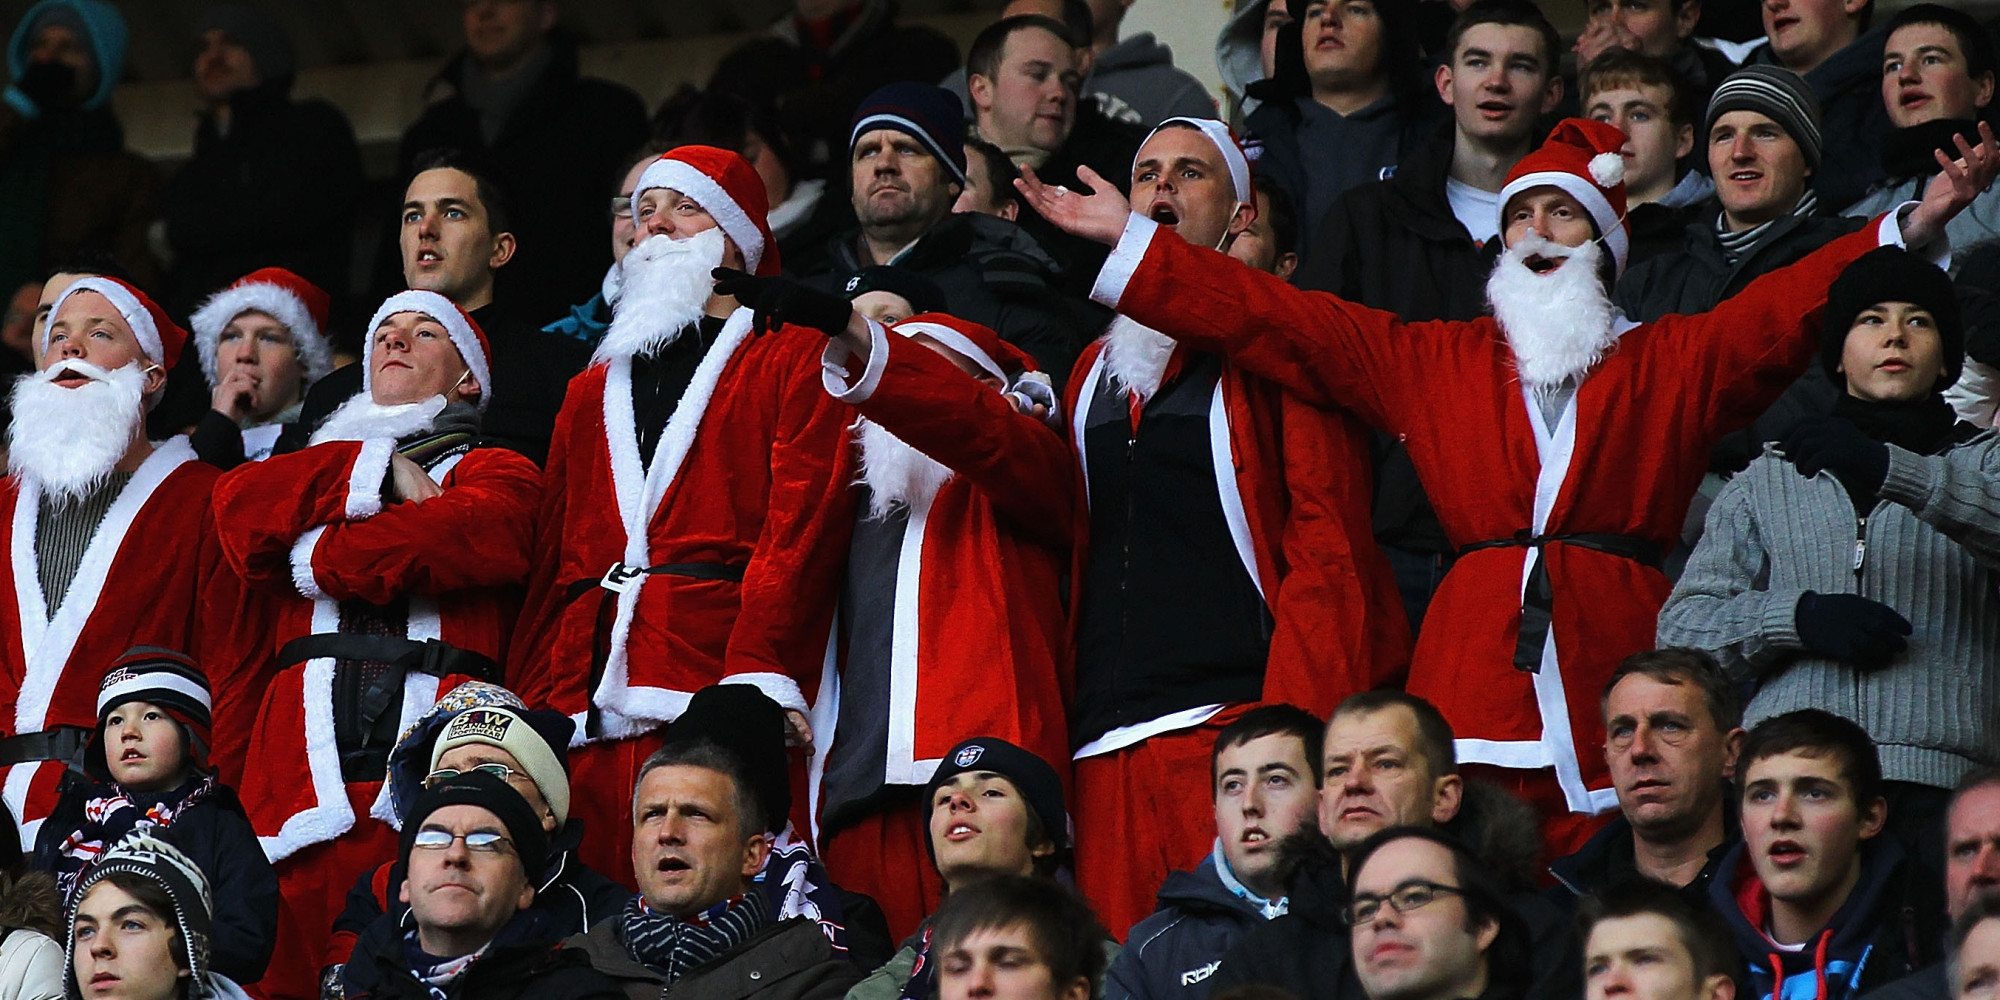 SUNDERLAND, ENGLAND - DECEMBER 18: Bolton Wanderers supporters dressed as Santa Claus watch from the stands during the Barclays Premier League match between Sunderland and Bolton Wanderers at Stadium of Light on December 18, 2010 in Sunderland, England. (Photo by Matthew Lewis/Getty Images)